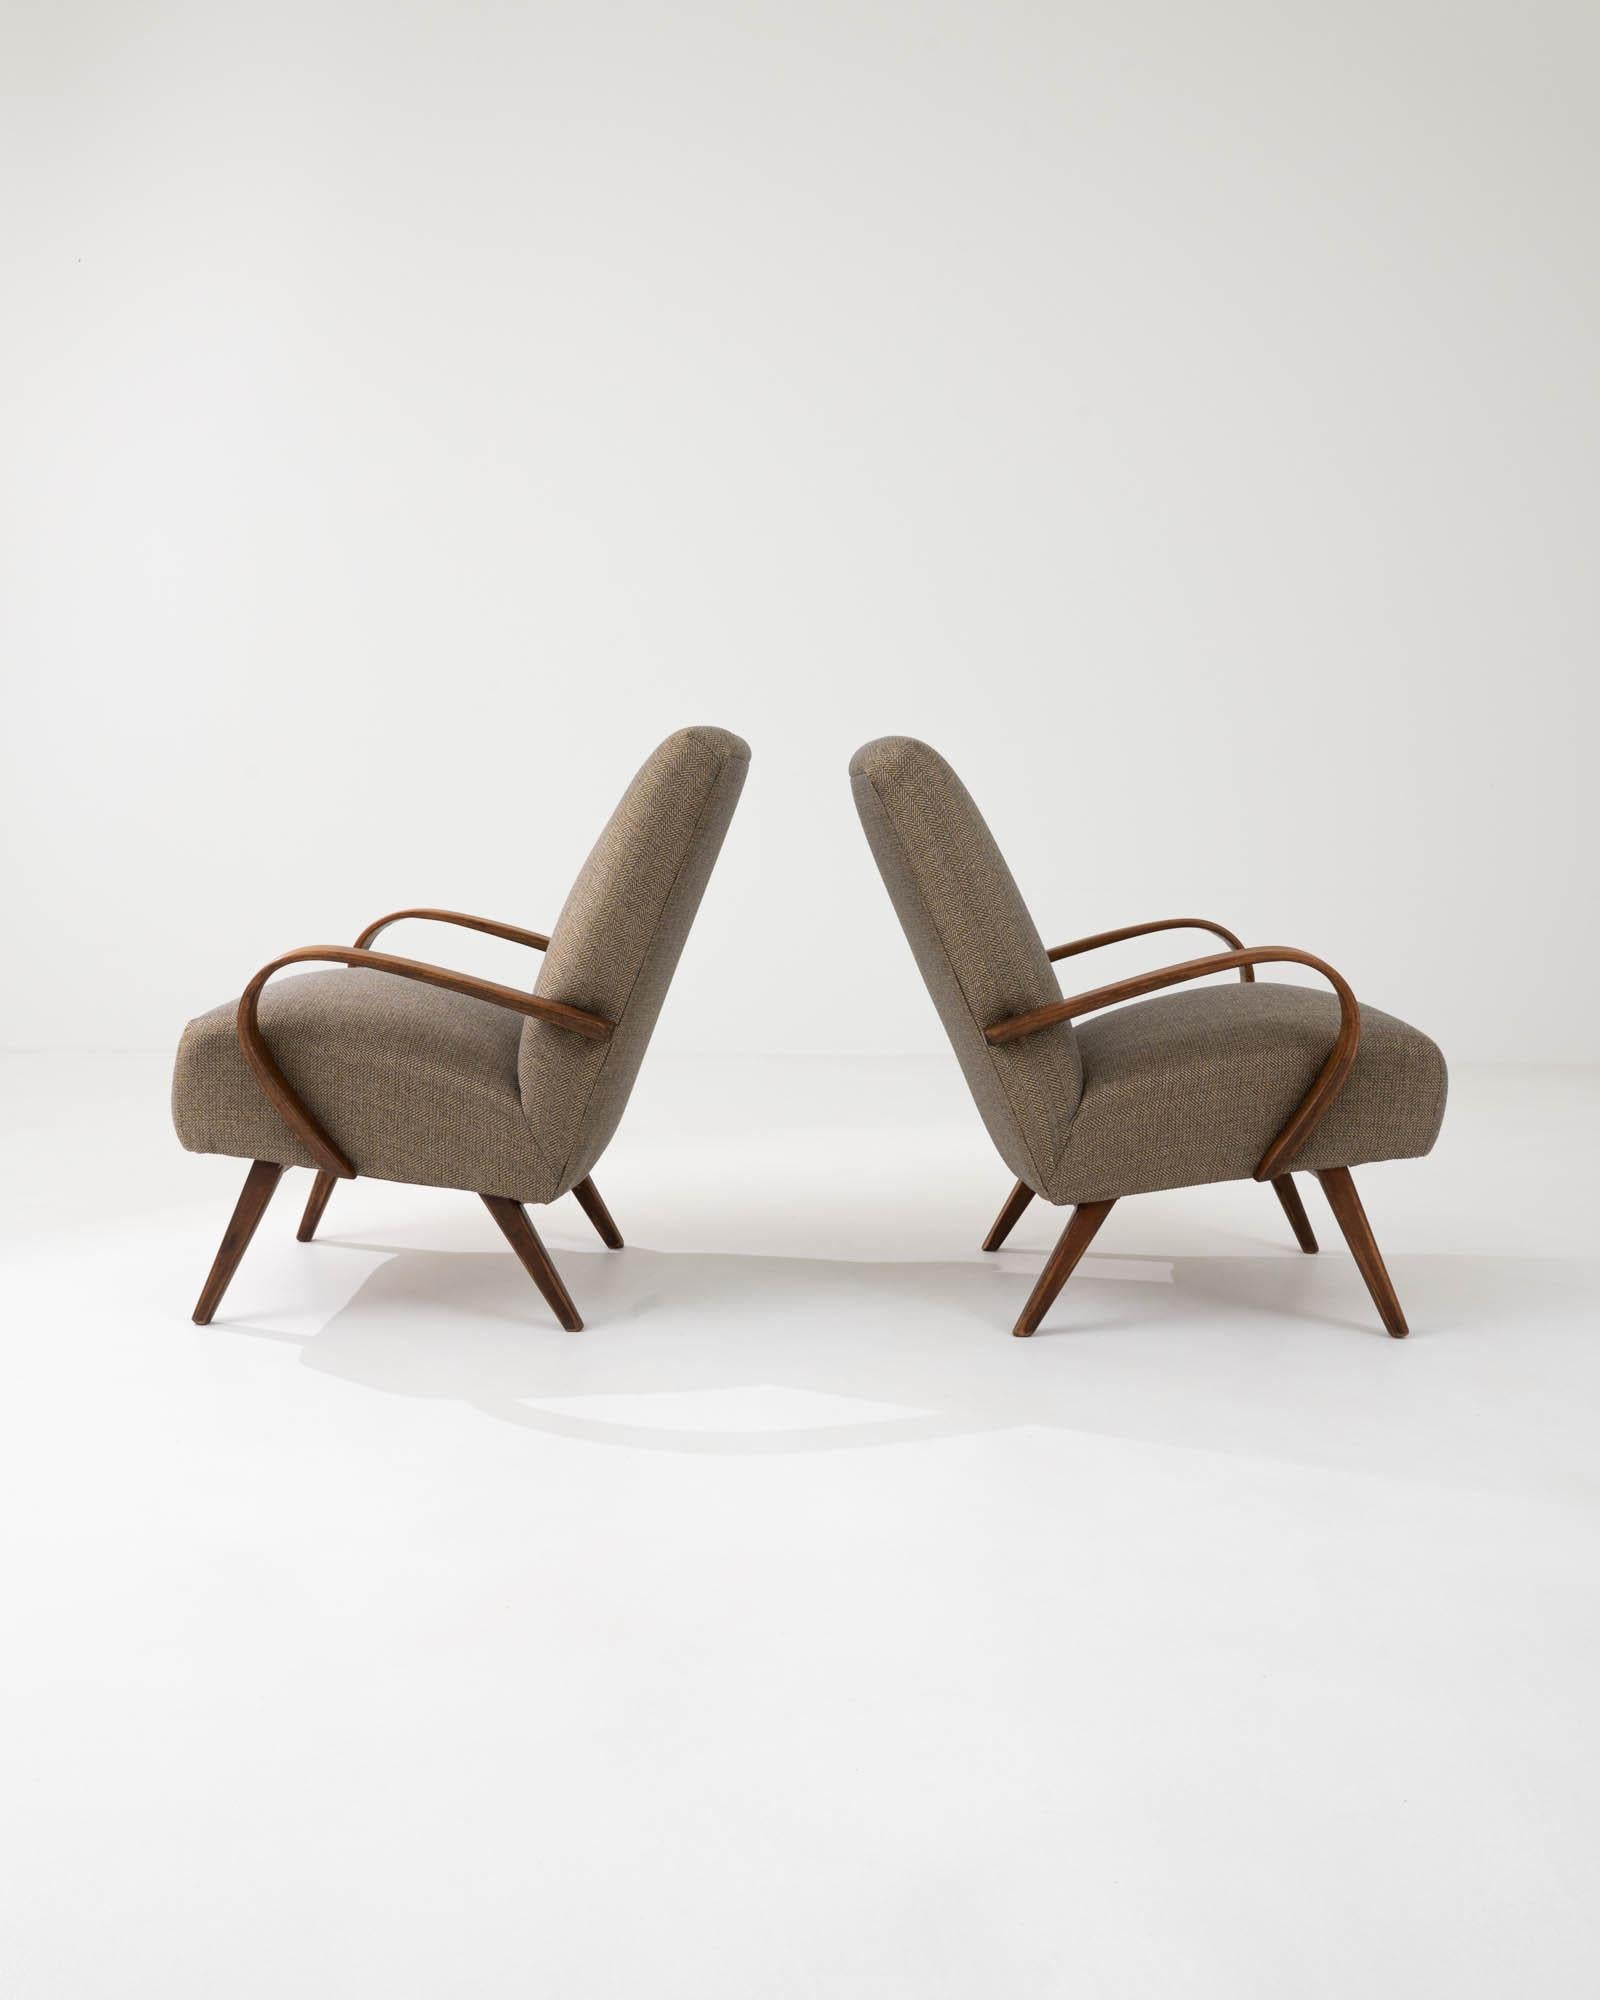 Upholstery 1950s Czech Beige Upholstered Armchairs, a Pair For Sale